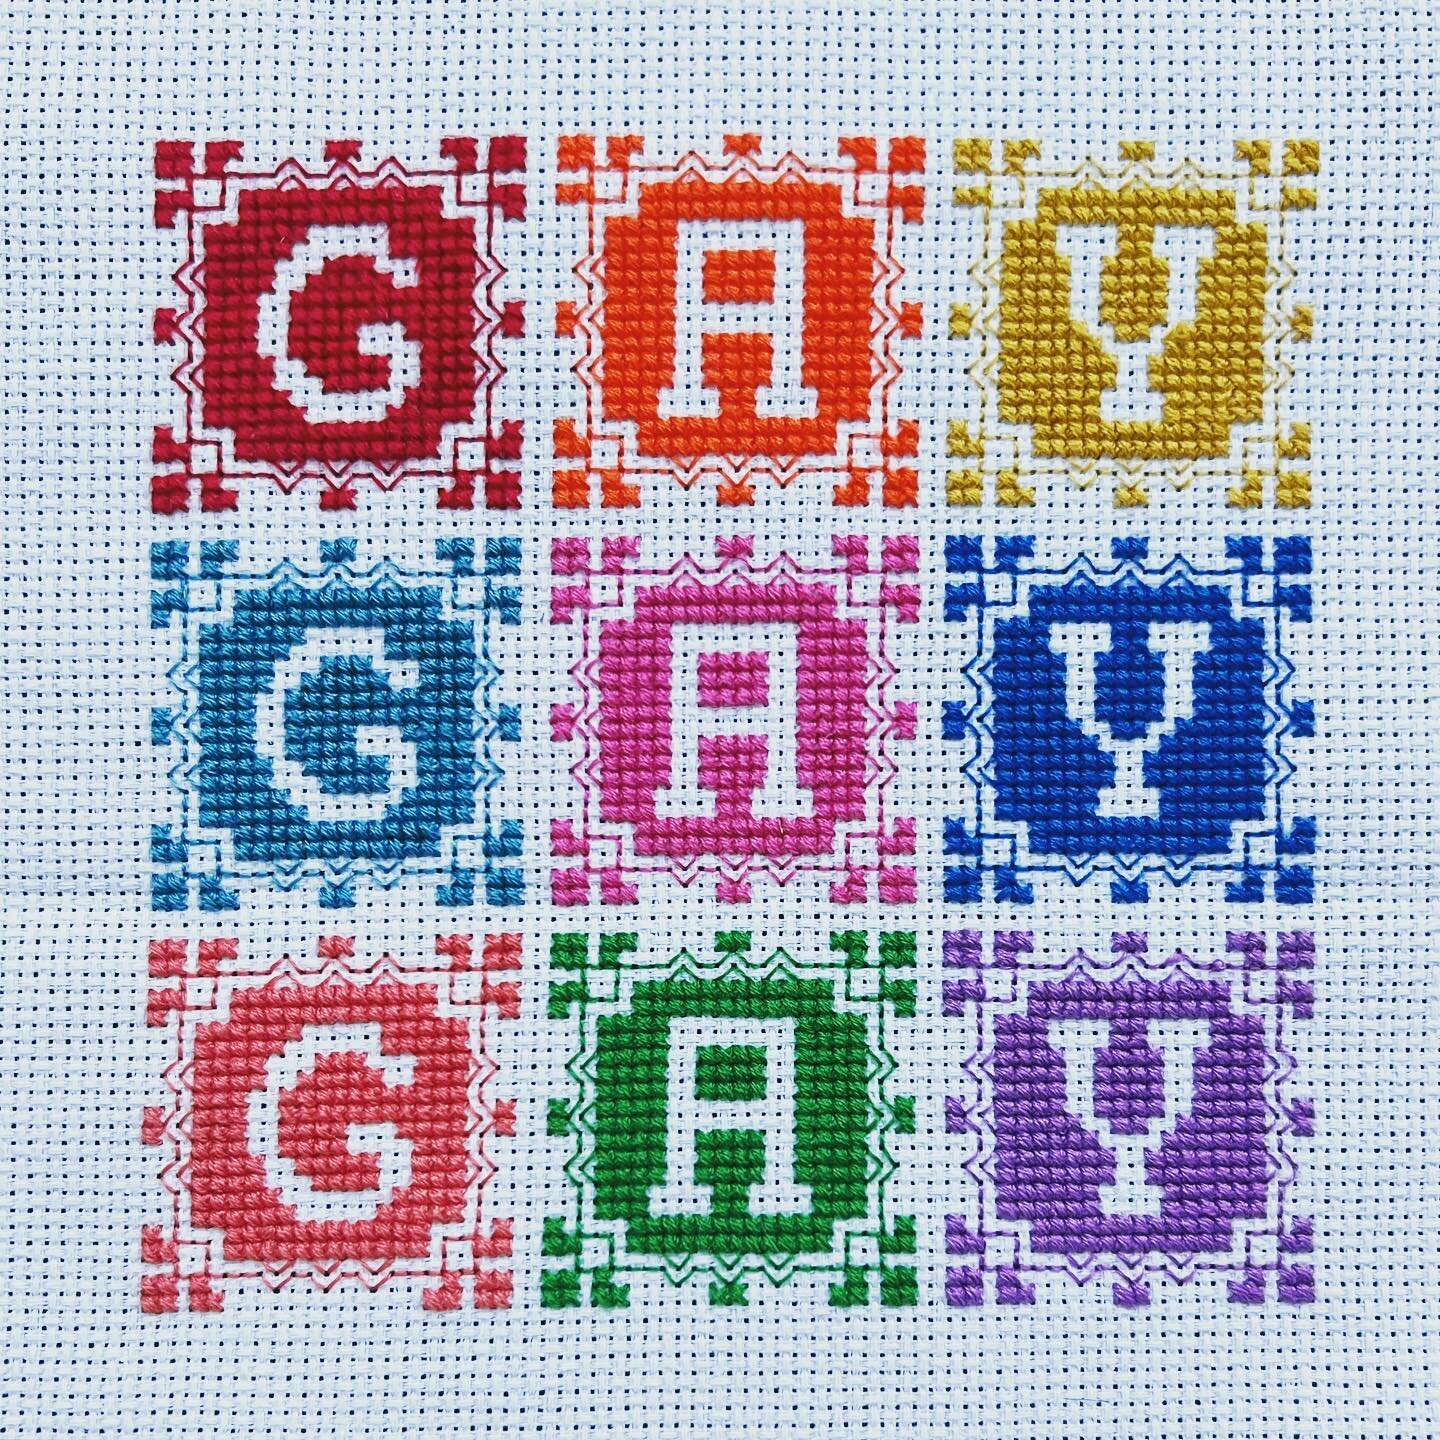 I keep forgetting to tell you that I did my annual art drop on my website. Best gifts are handmade and support artists. ;) Get &lsquo;em while they are hot! Say Gay is both available to purchase or the pattern is available for you on my free patterns